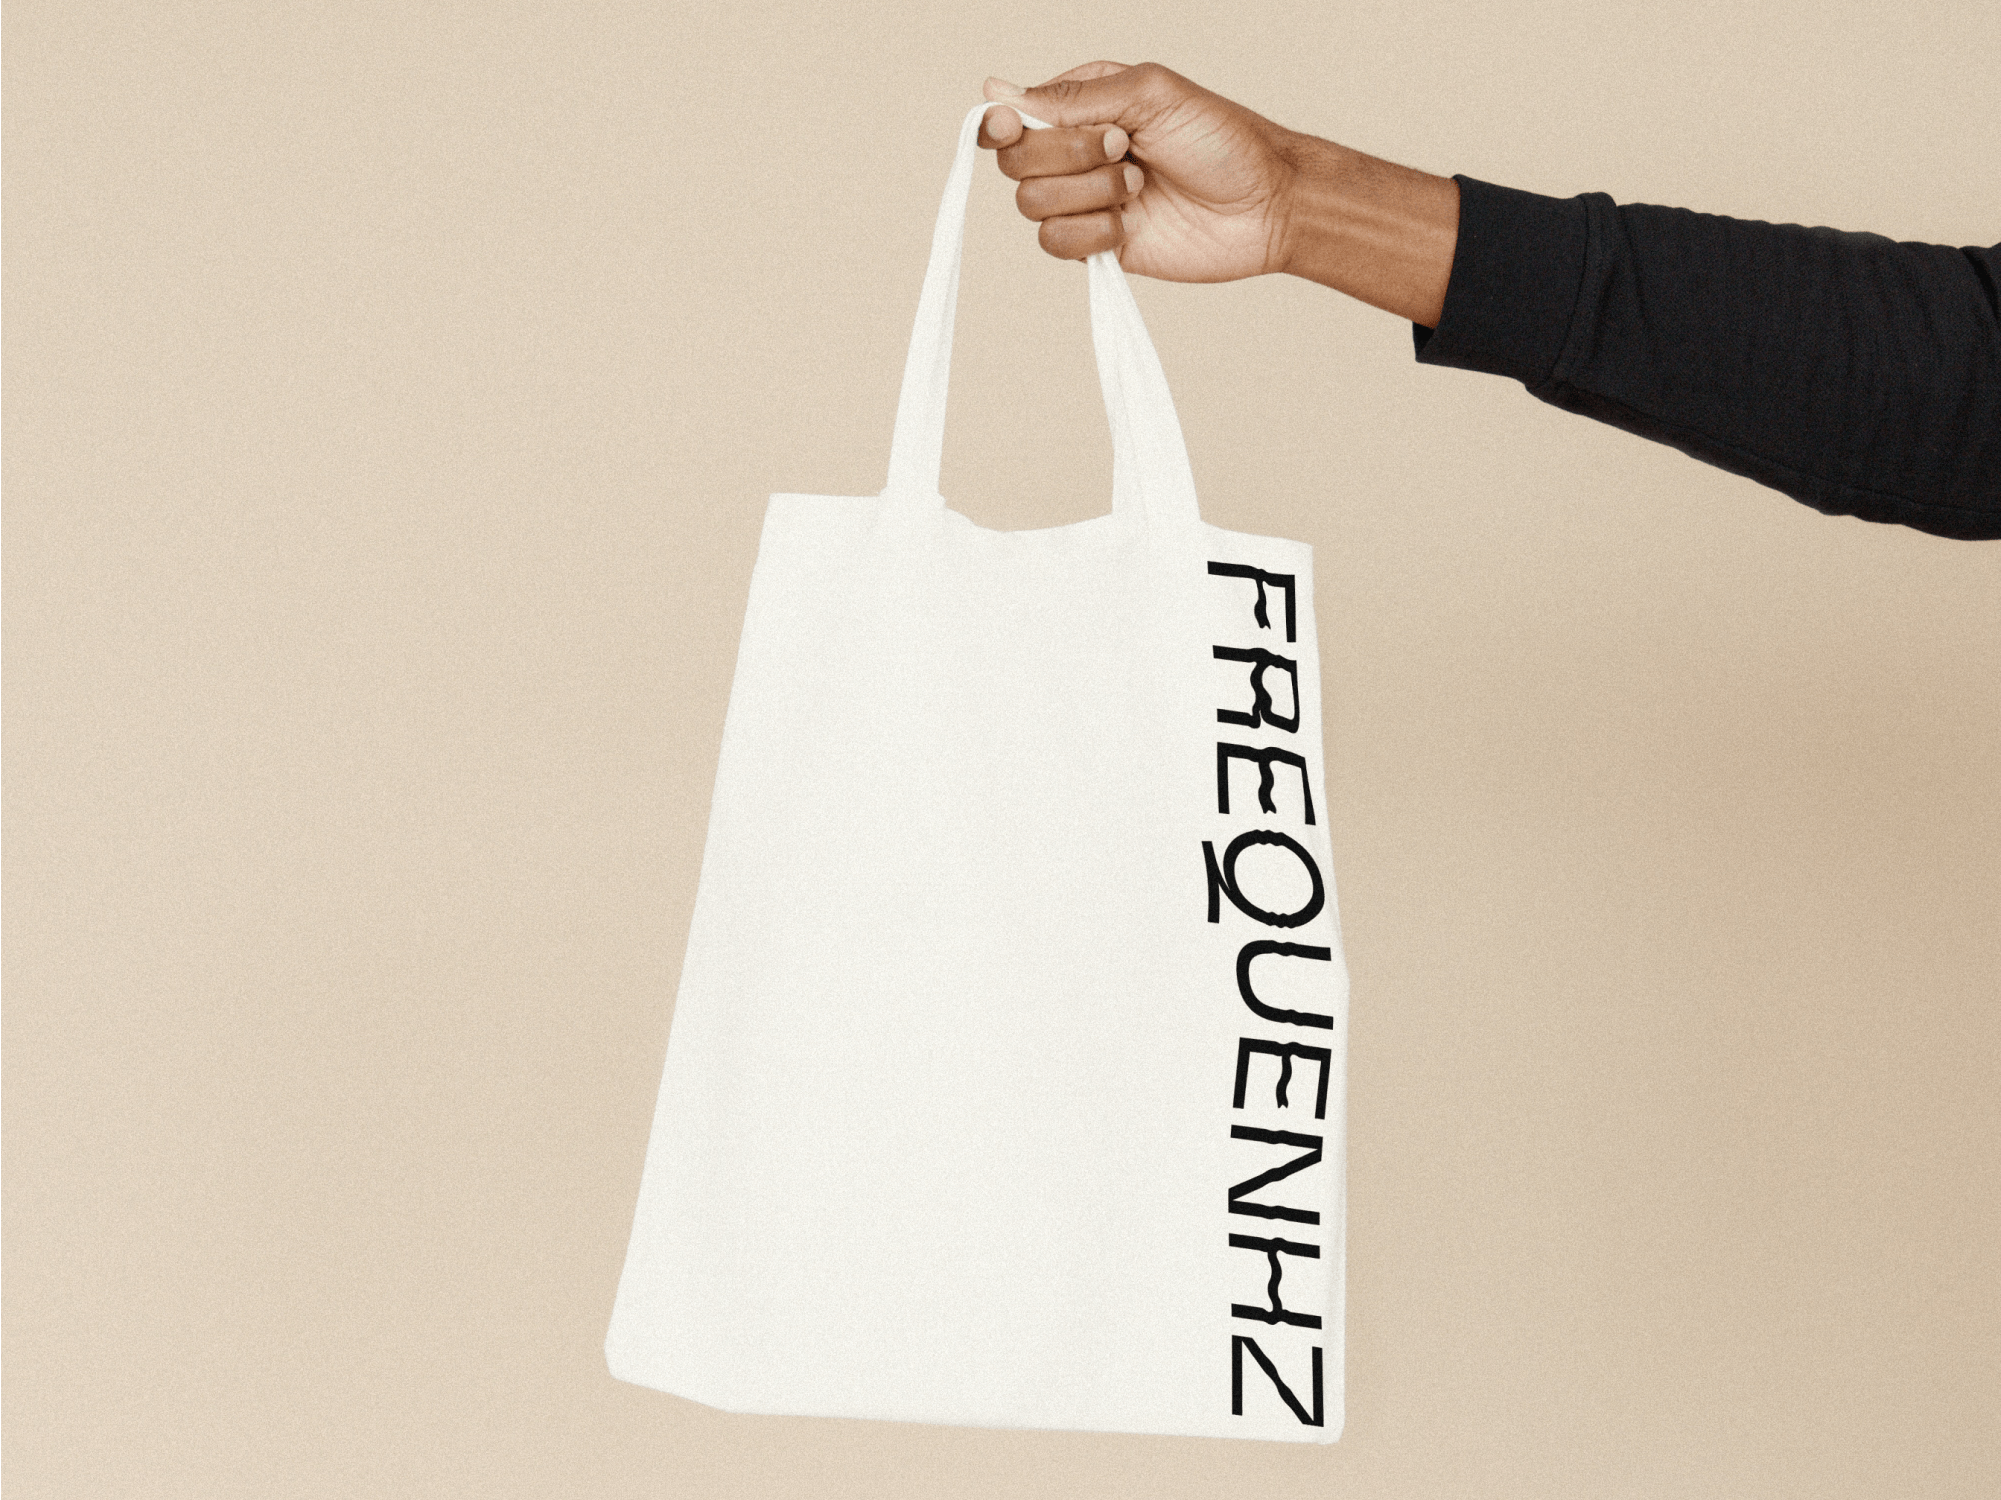 frequenhz logotype in a white shopping bag held by hand